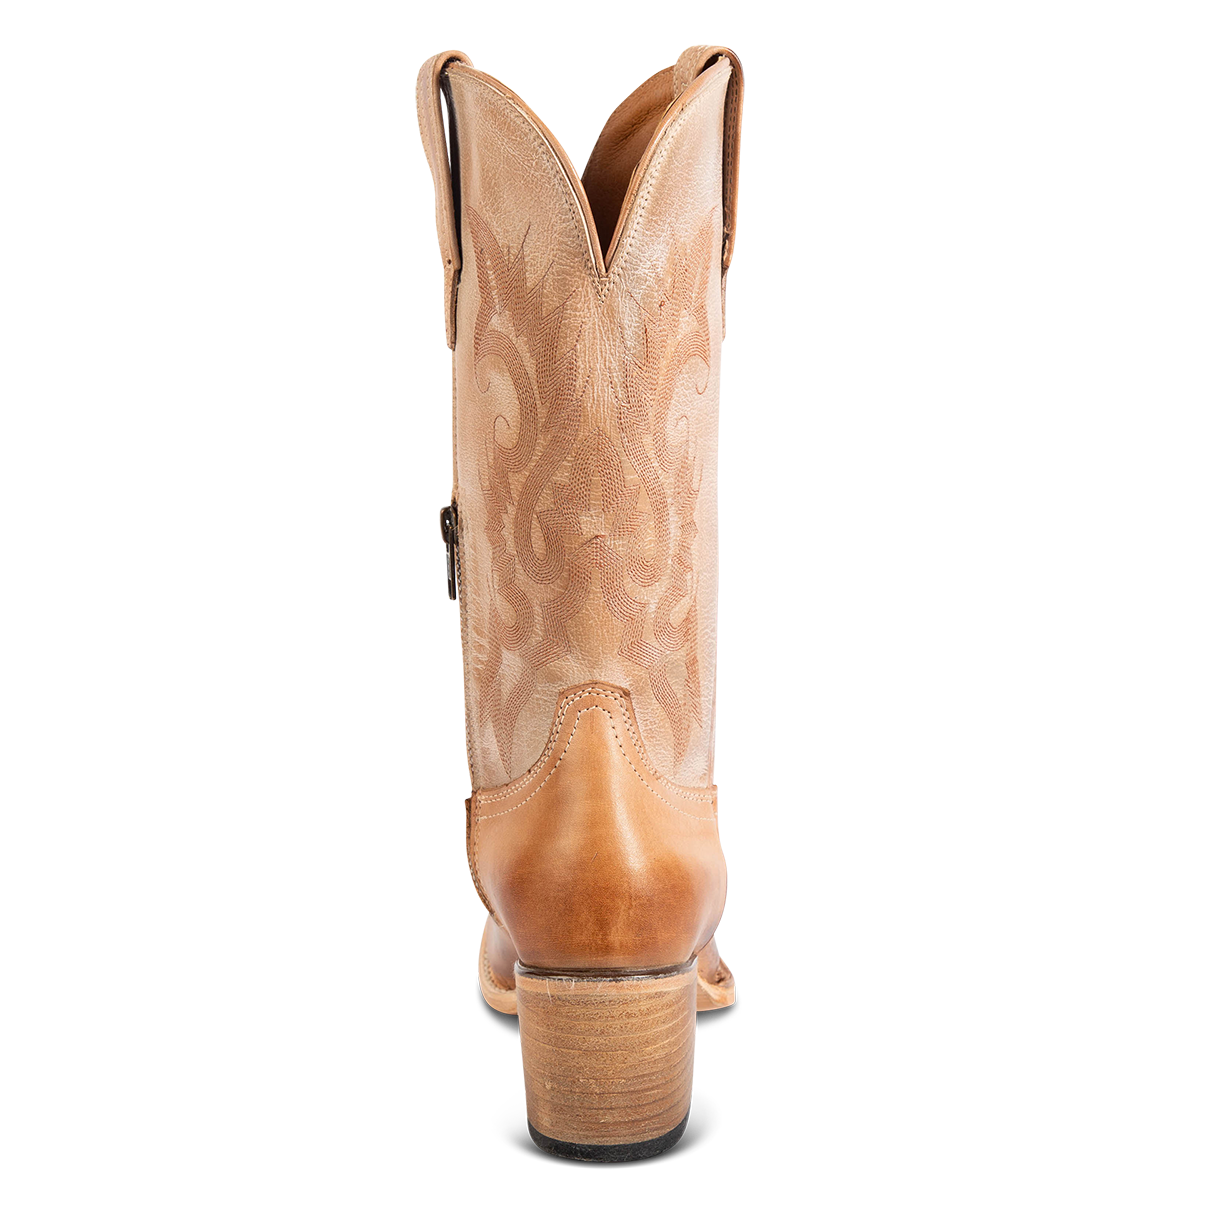 Back view showing a stacked heel, shaft stitch detailing and back dip on FREEBIRD women's Dice beige leather boot